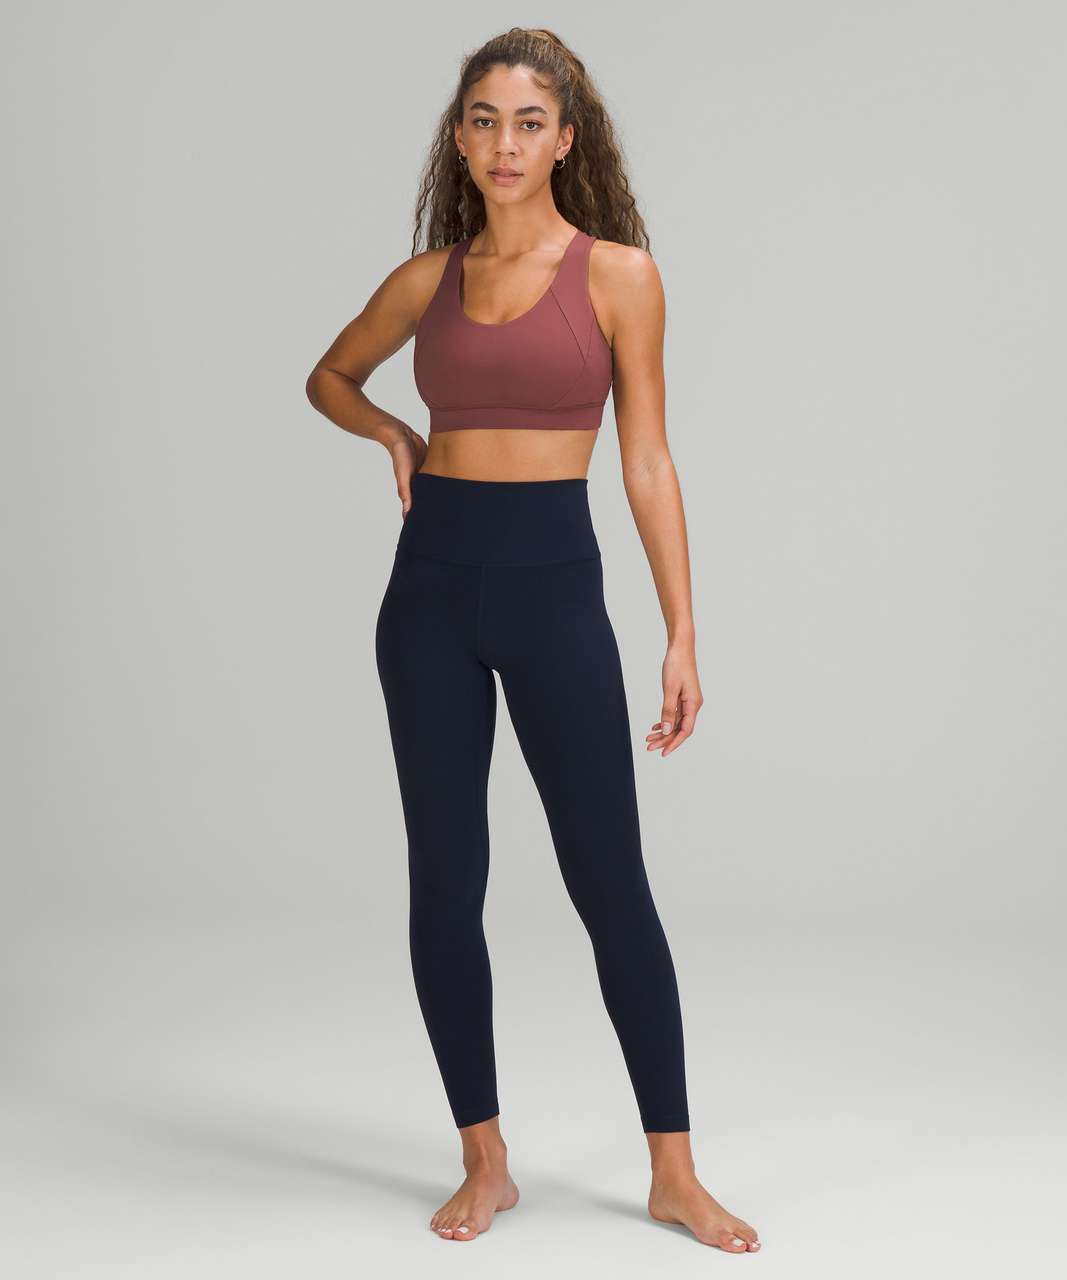 Lululemon Free to Be Elevated Bra *Light Support, DD/DDD(E) Cup - Smoky ...